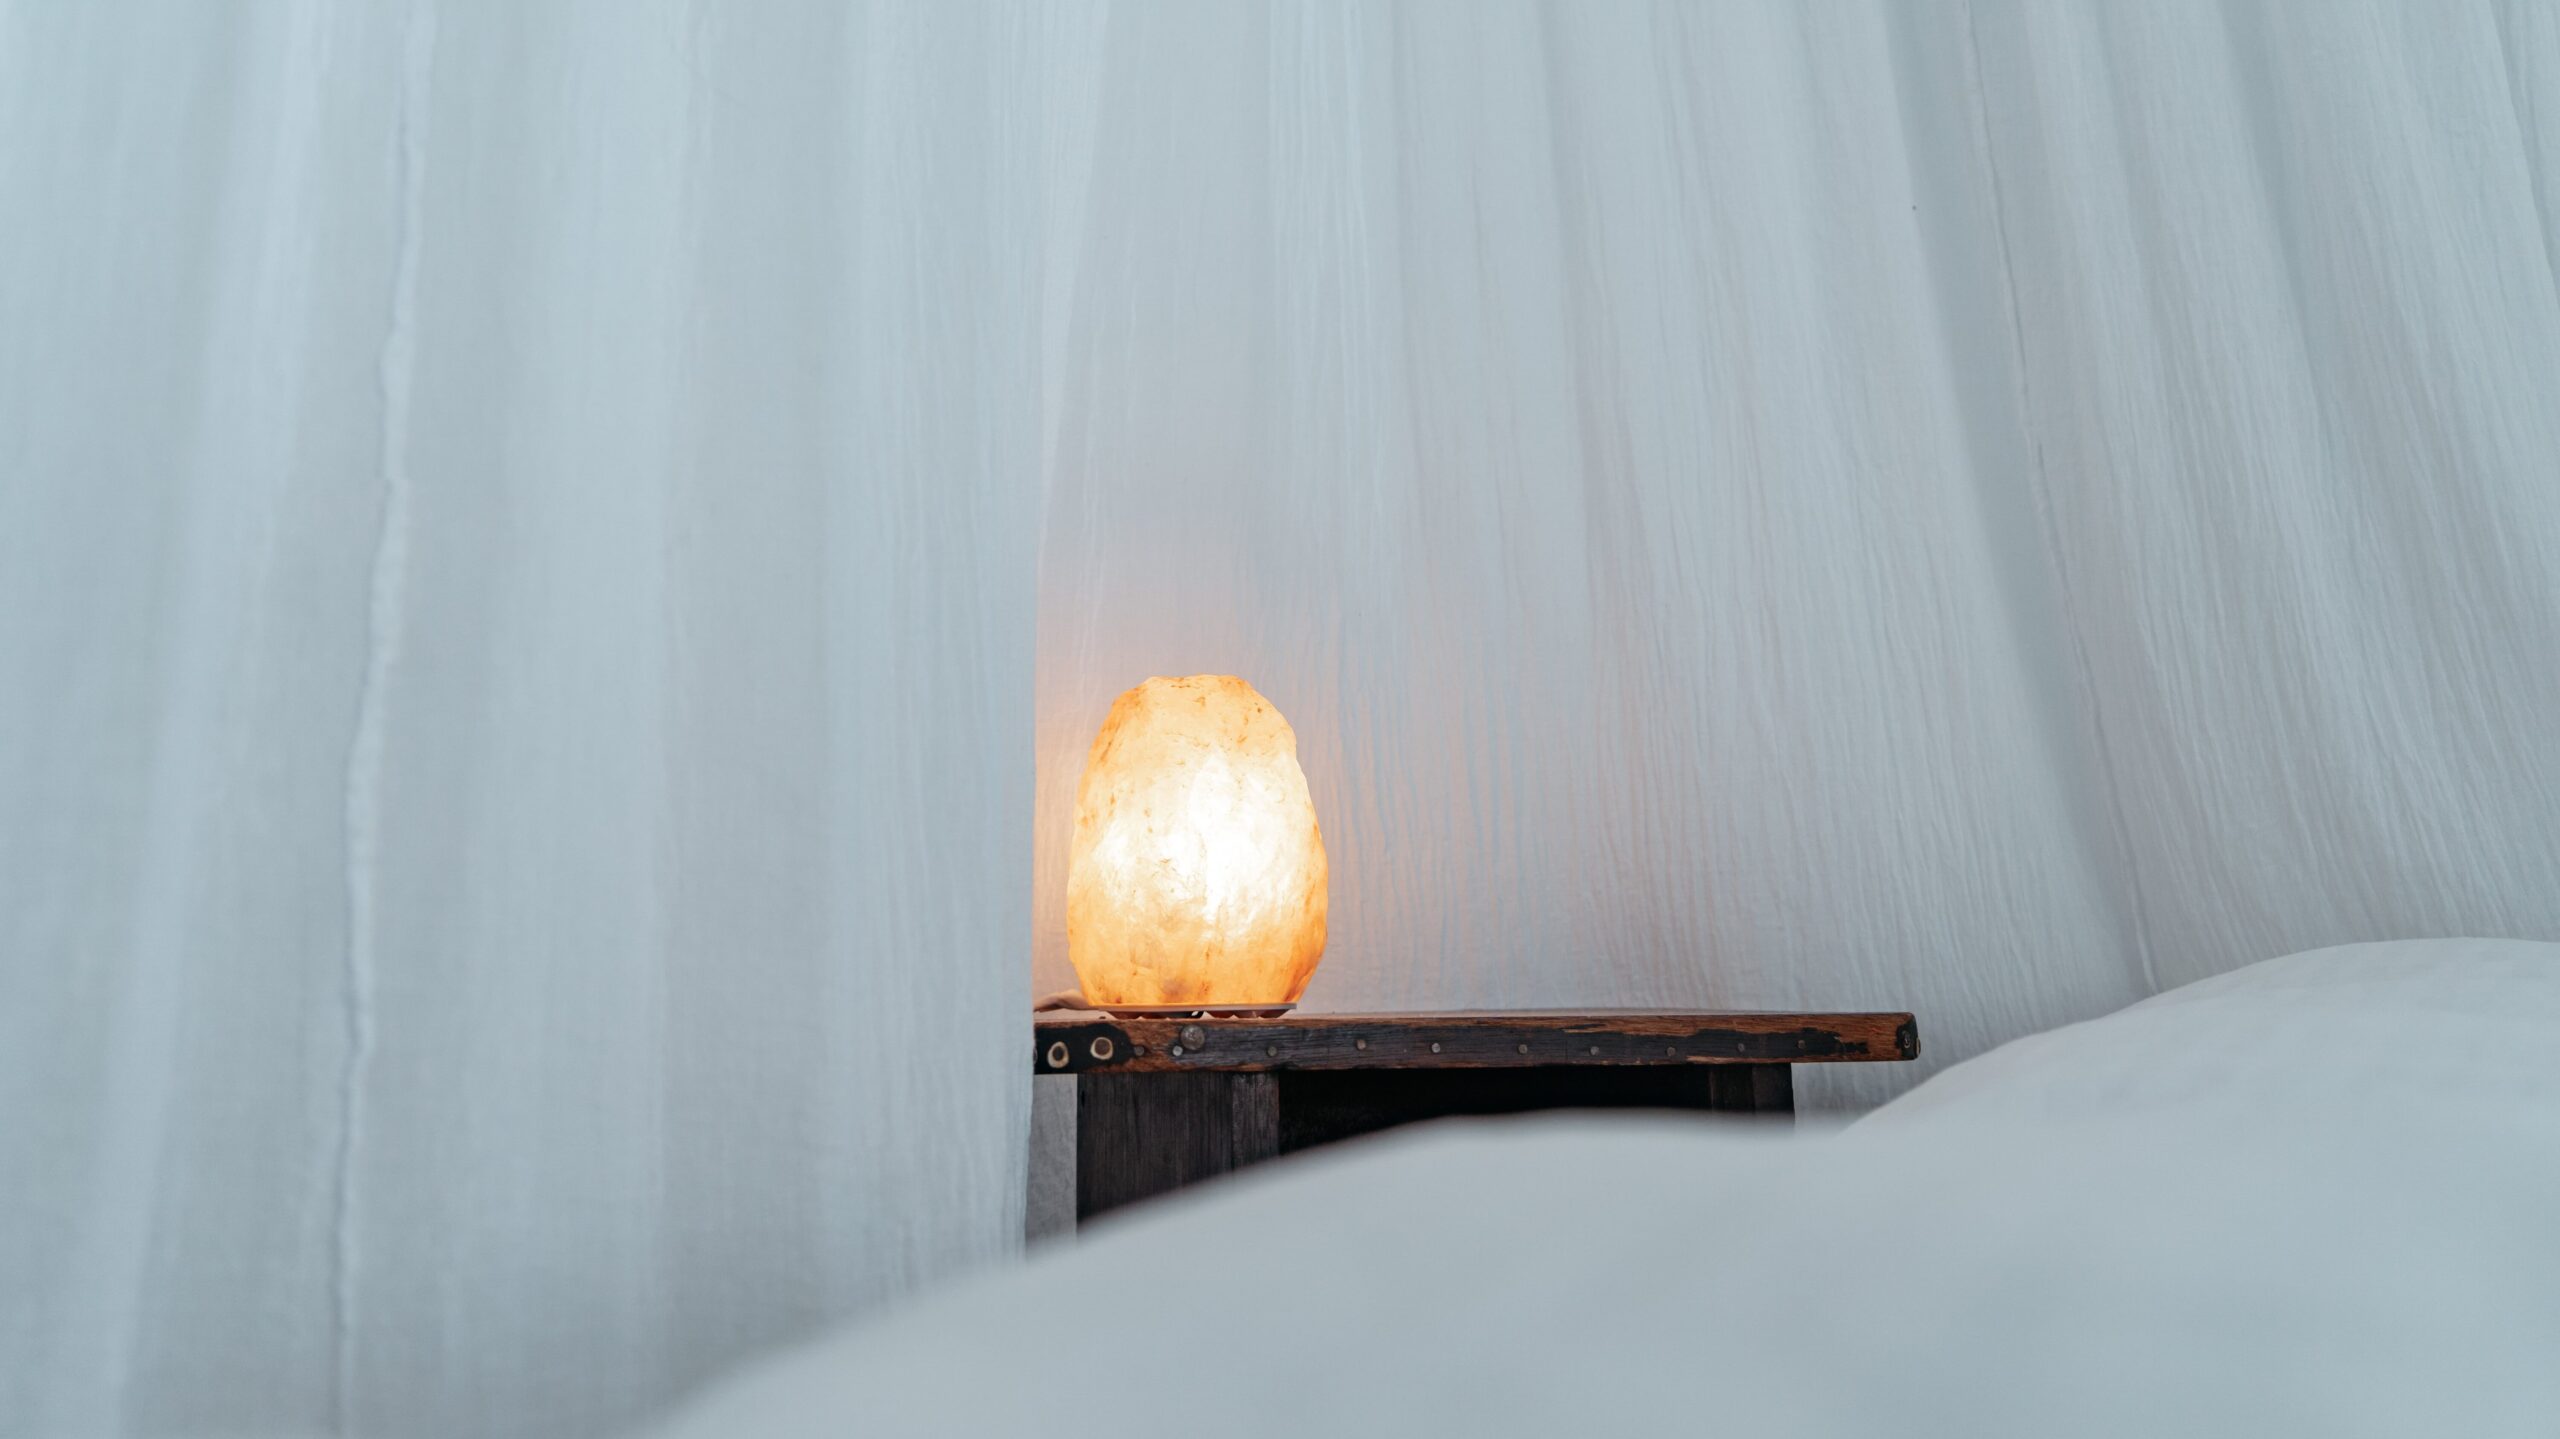 Himalayan salt lamp in a white room - benefits of sleeping with crystals under your pillow